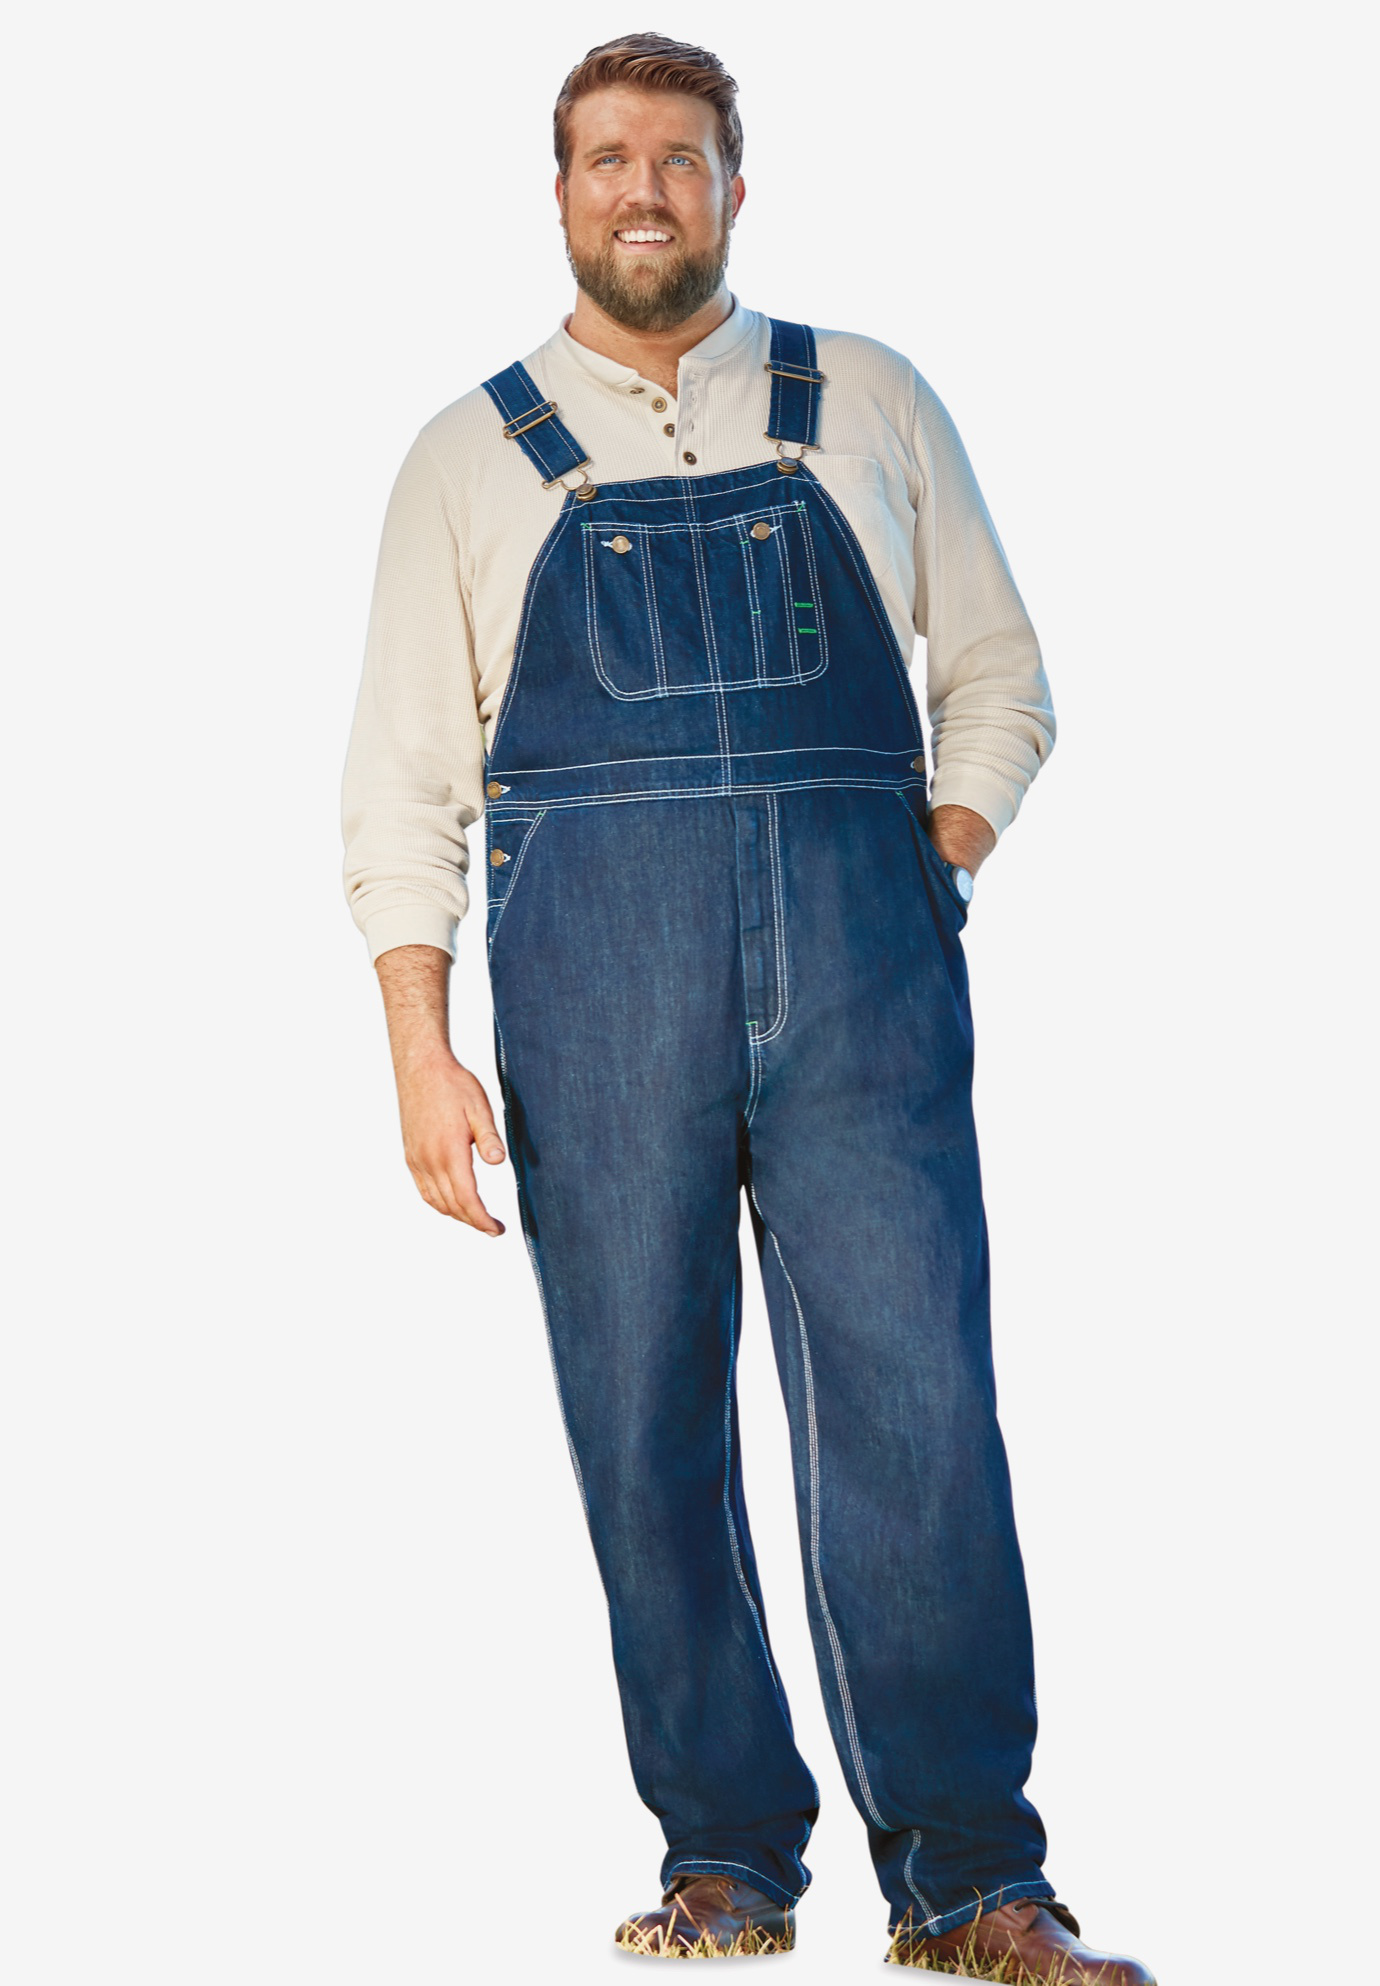 Boulder Creek® Denim Overalls| Big and Tall All Jeans | King Size